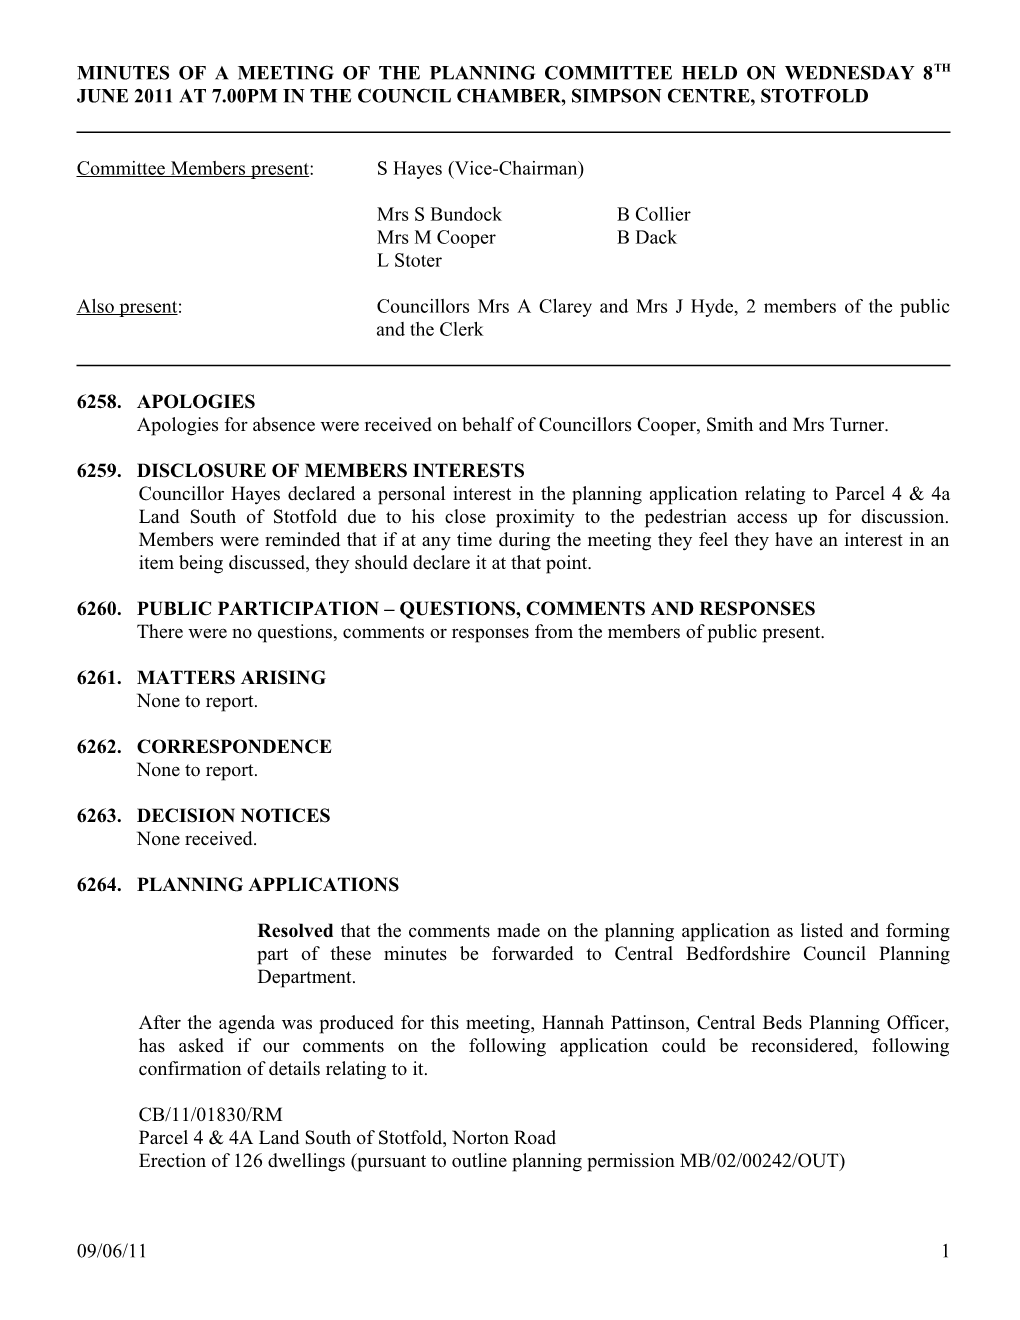 Minutes of a Meeting of the Planning Committee Held on Wednesday 8Th June 2011 at 7